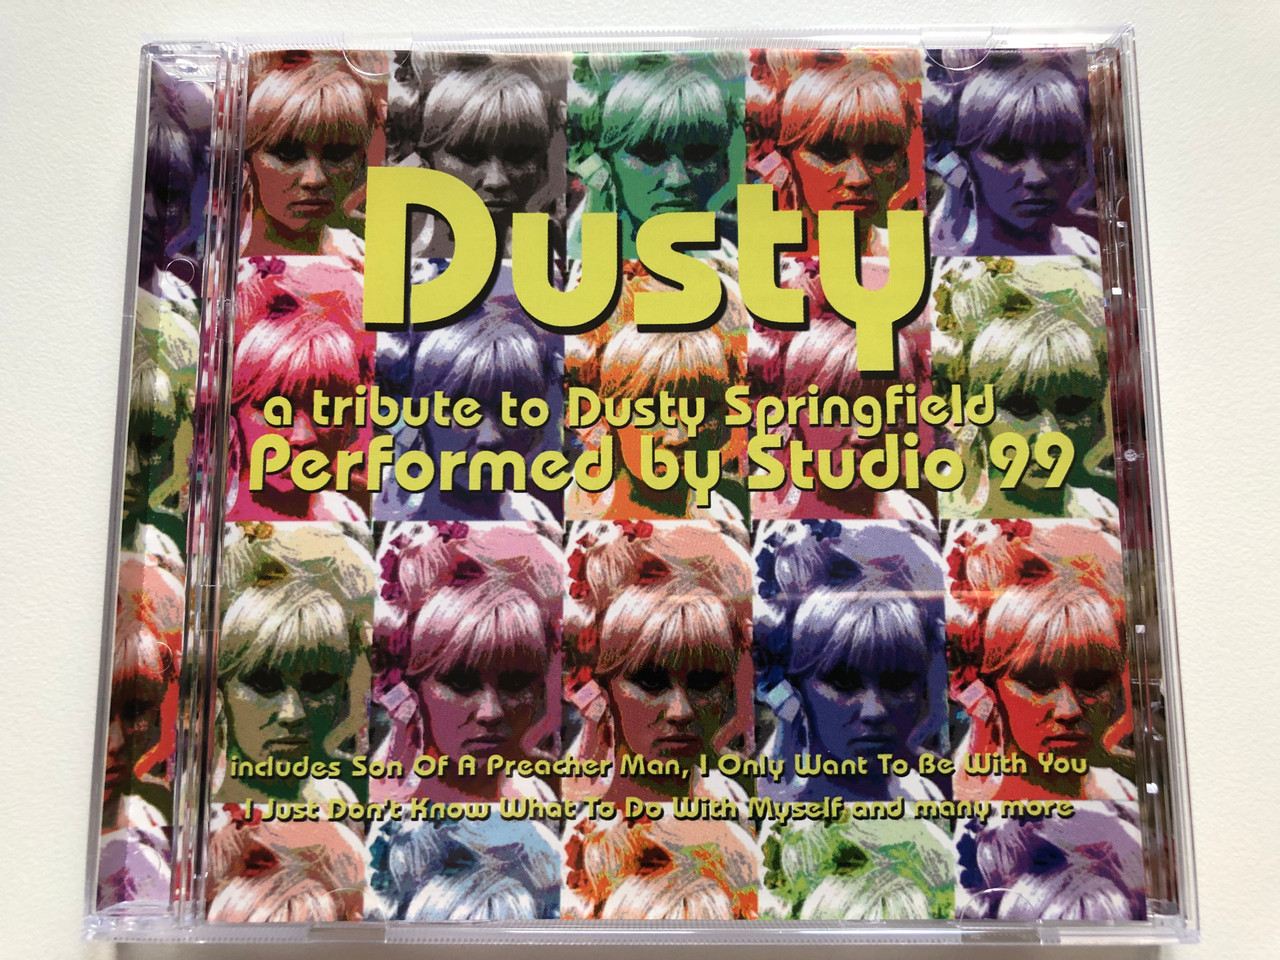 https://cdn10.bigcommerce.com/s-62bdpkt7pb/products/0/images/190541/Dusty_-_A_Tribute_To_Dusty_Springfield_-_Performed_by_Studio_99_Includes_Son_Of_A_Preacher_Man_I_Only_Want_To_Be_With_You_I_Just_Dont_Know_What_To_Do_With_Myself_and_many_more_Maverick_1__32869.1631025416.1280.1280.JPG?c=2&_gl=1*14e8316*_ga*MjA2NTIxMjE2MC4xNTkwNTEyNTMy*_ga_WS2VZYPC6G*MTYzMTAxOTAzNi42OC4xLjE2MzEwMjUxNzQuMzk.